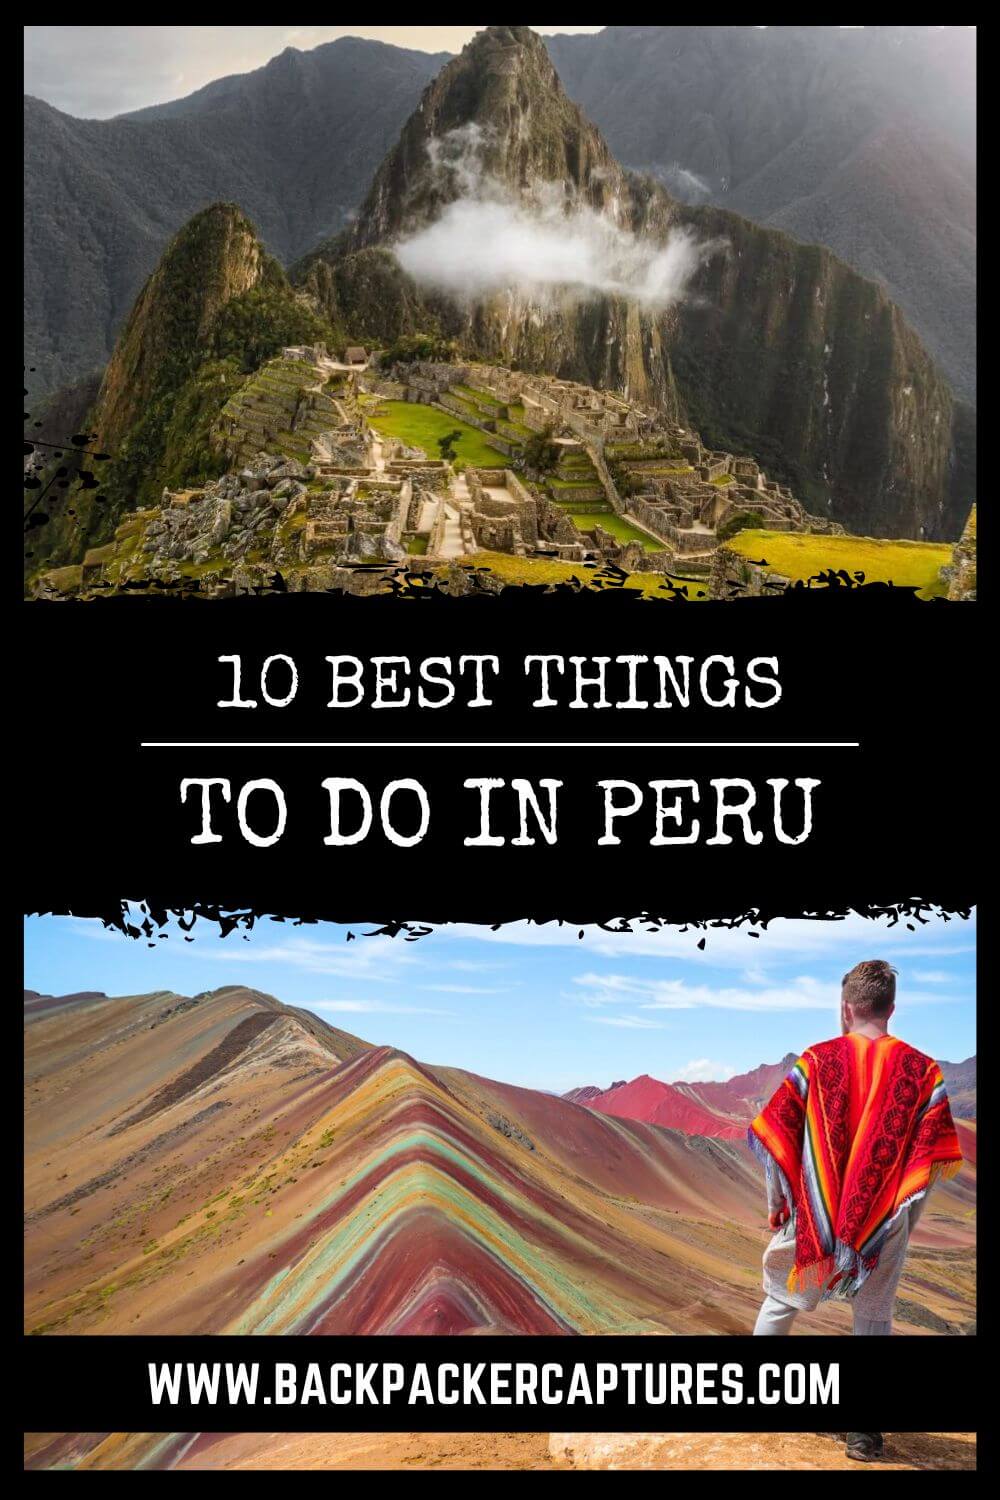 10 Best Things to Do in Peru